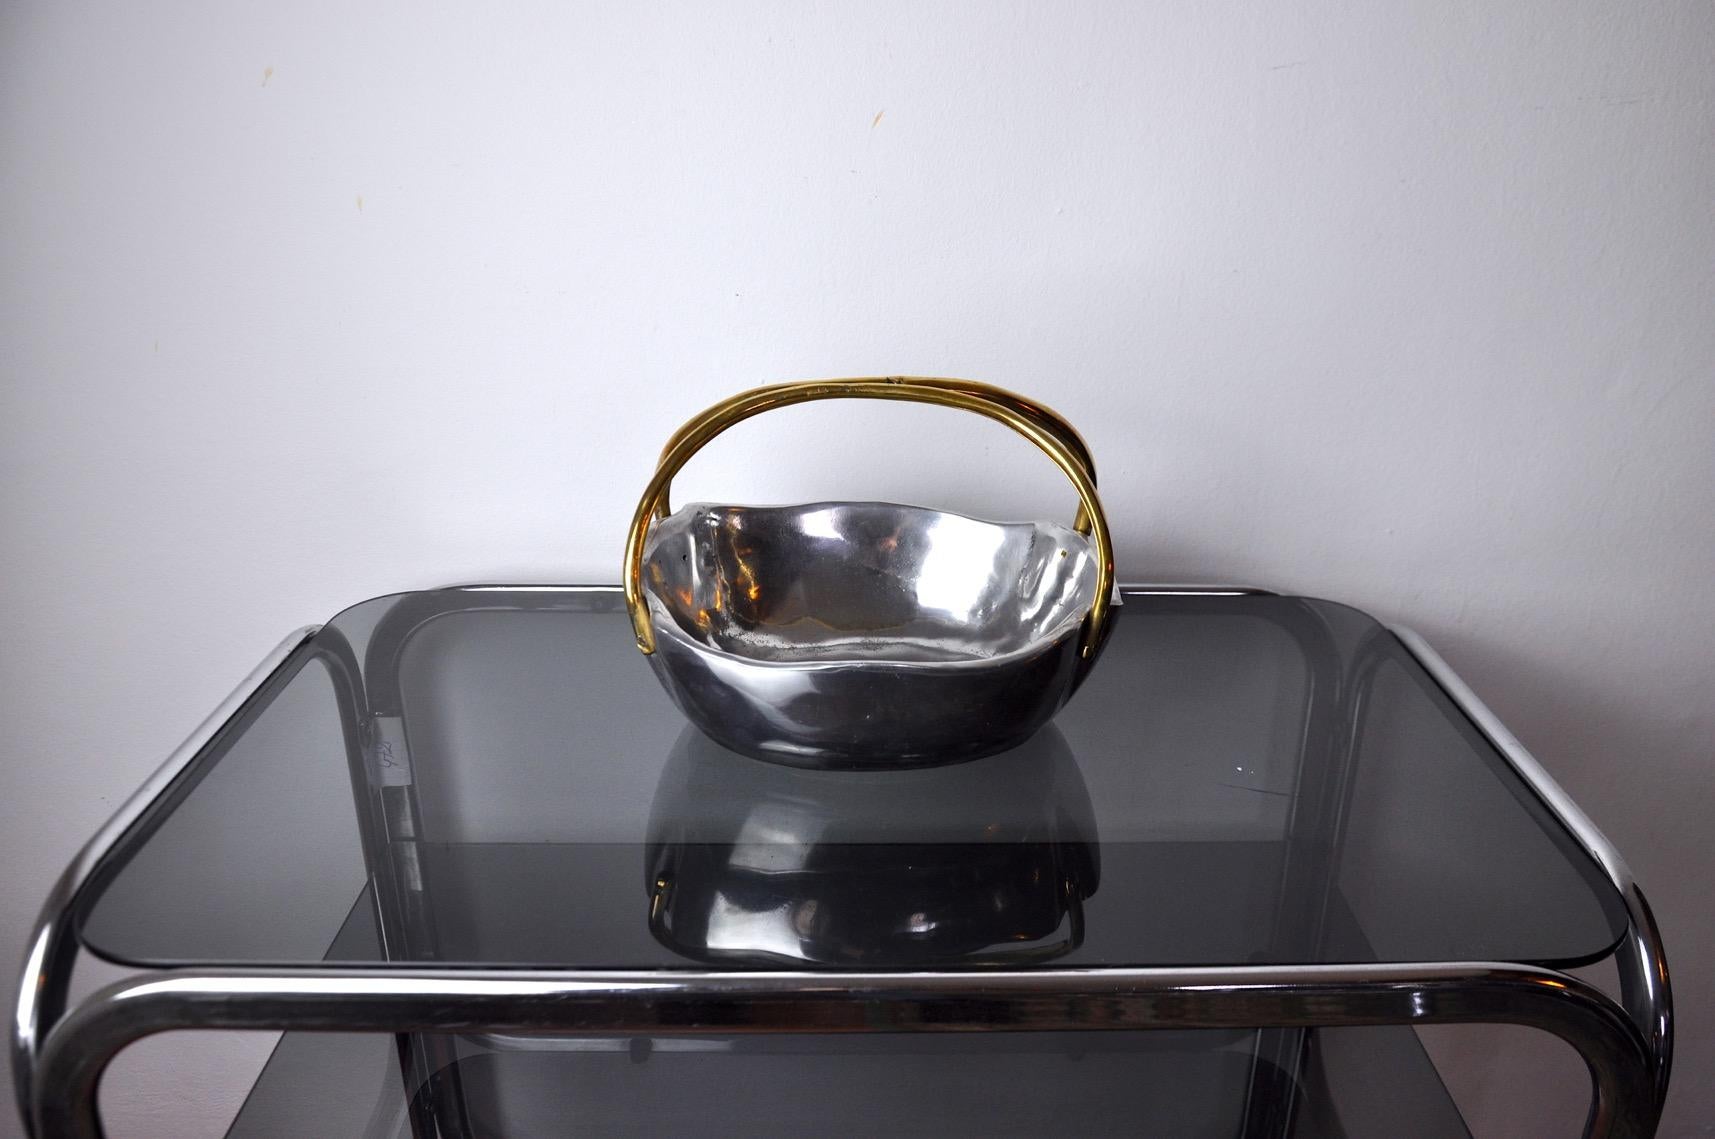 Superb empty pocket or brutalized fruit bowl designed and made by the artist david marshall around the 80s, spain. Rare works by the artist in brass and silver metal. 

 